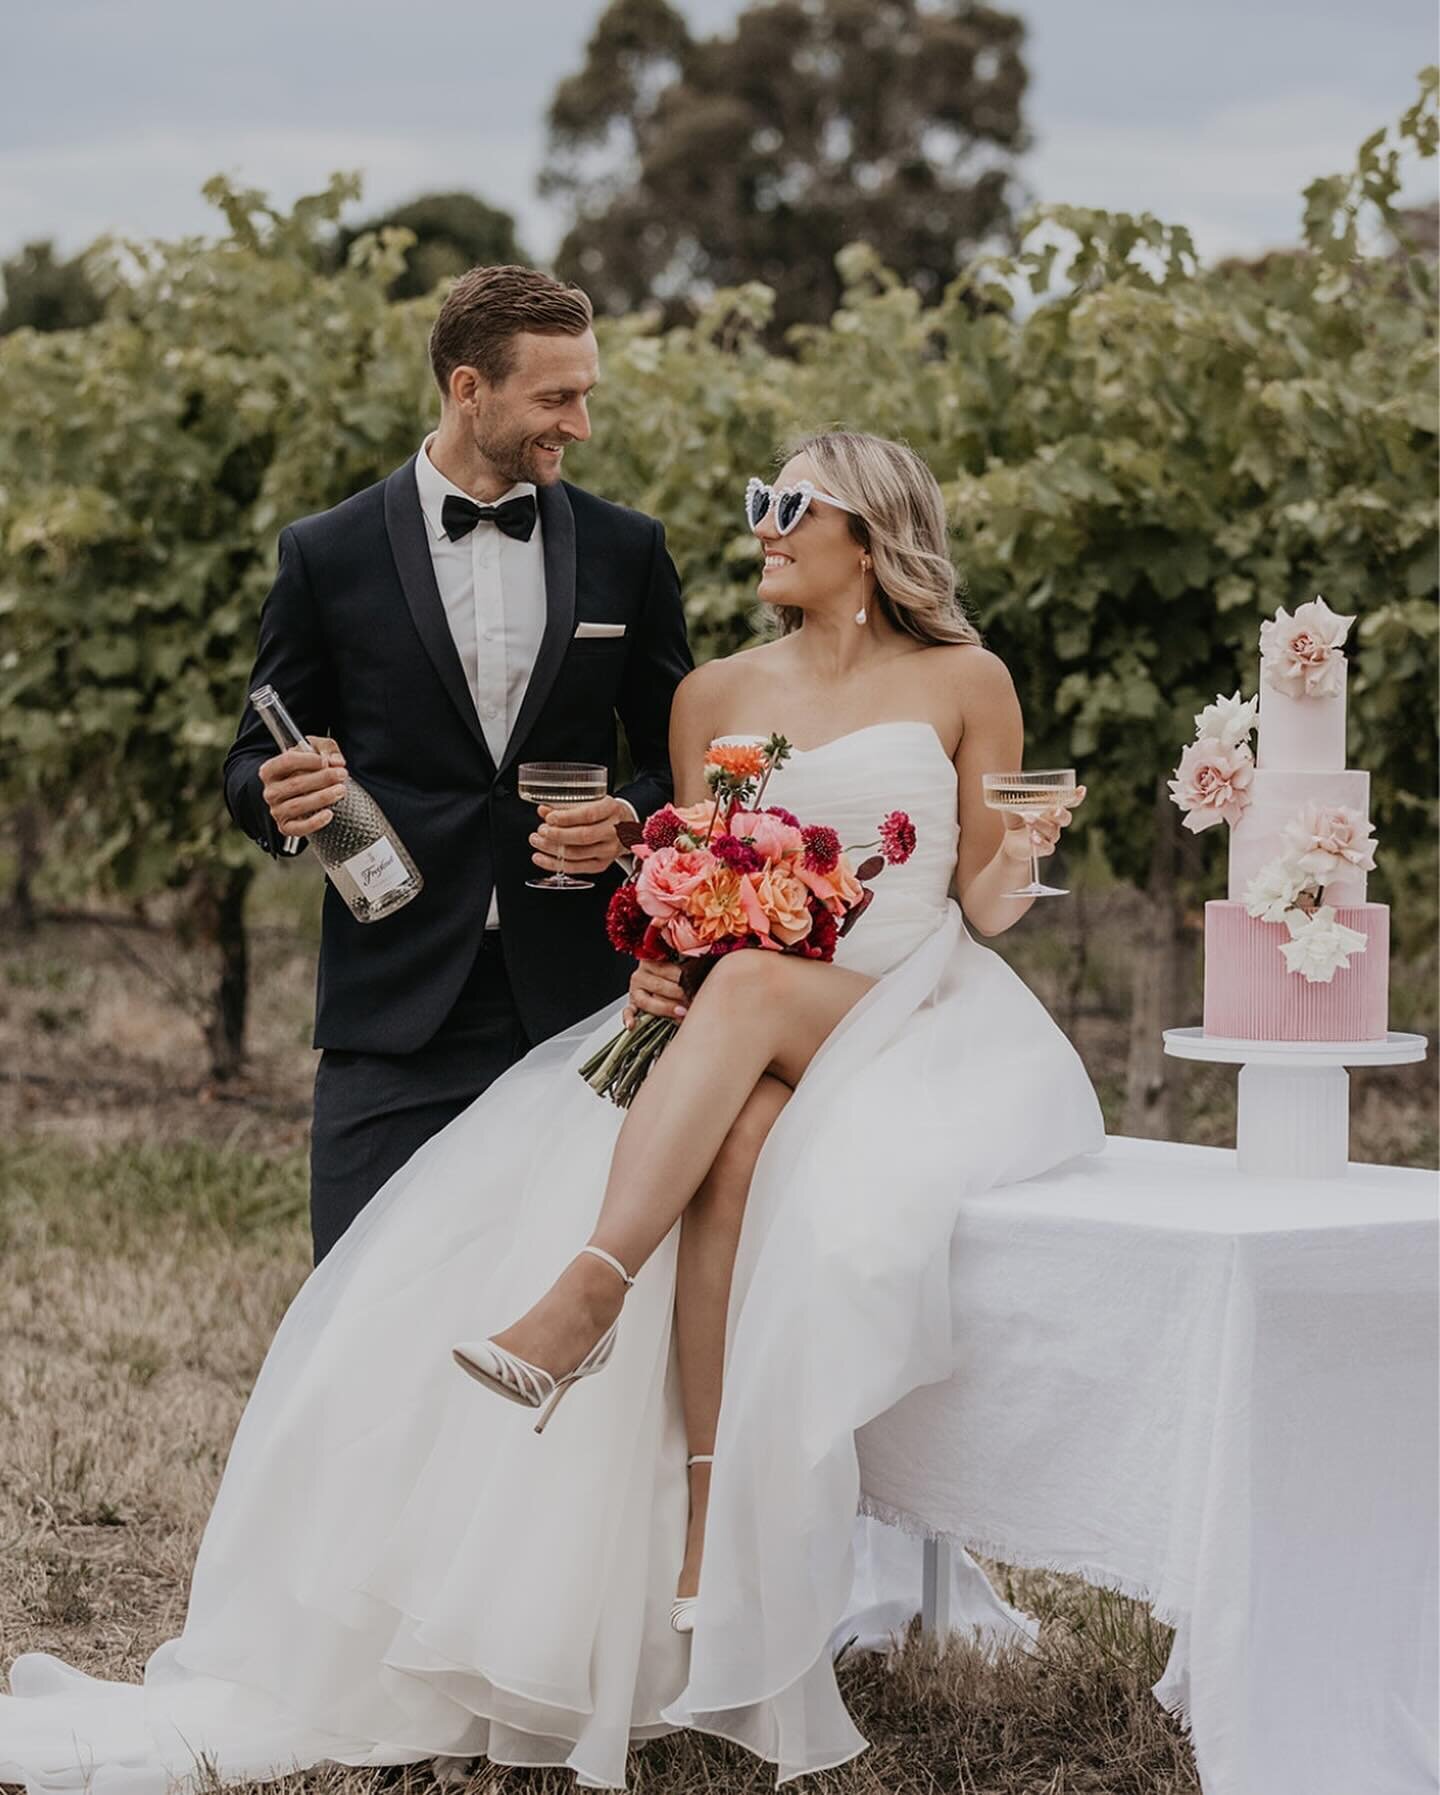 SUMMER LOVE IN ECHUCA-MOAMA: A MODERN WEDDING

Love is in the air as we take you on a journey to a beautiful summer wedding in the charming twin towns of Echuca-Moama.

This picturesque location provides the perfect backdrop for a dreamy and modern c